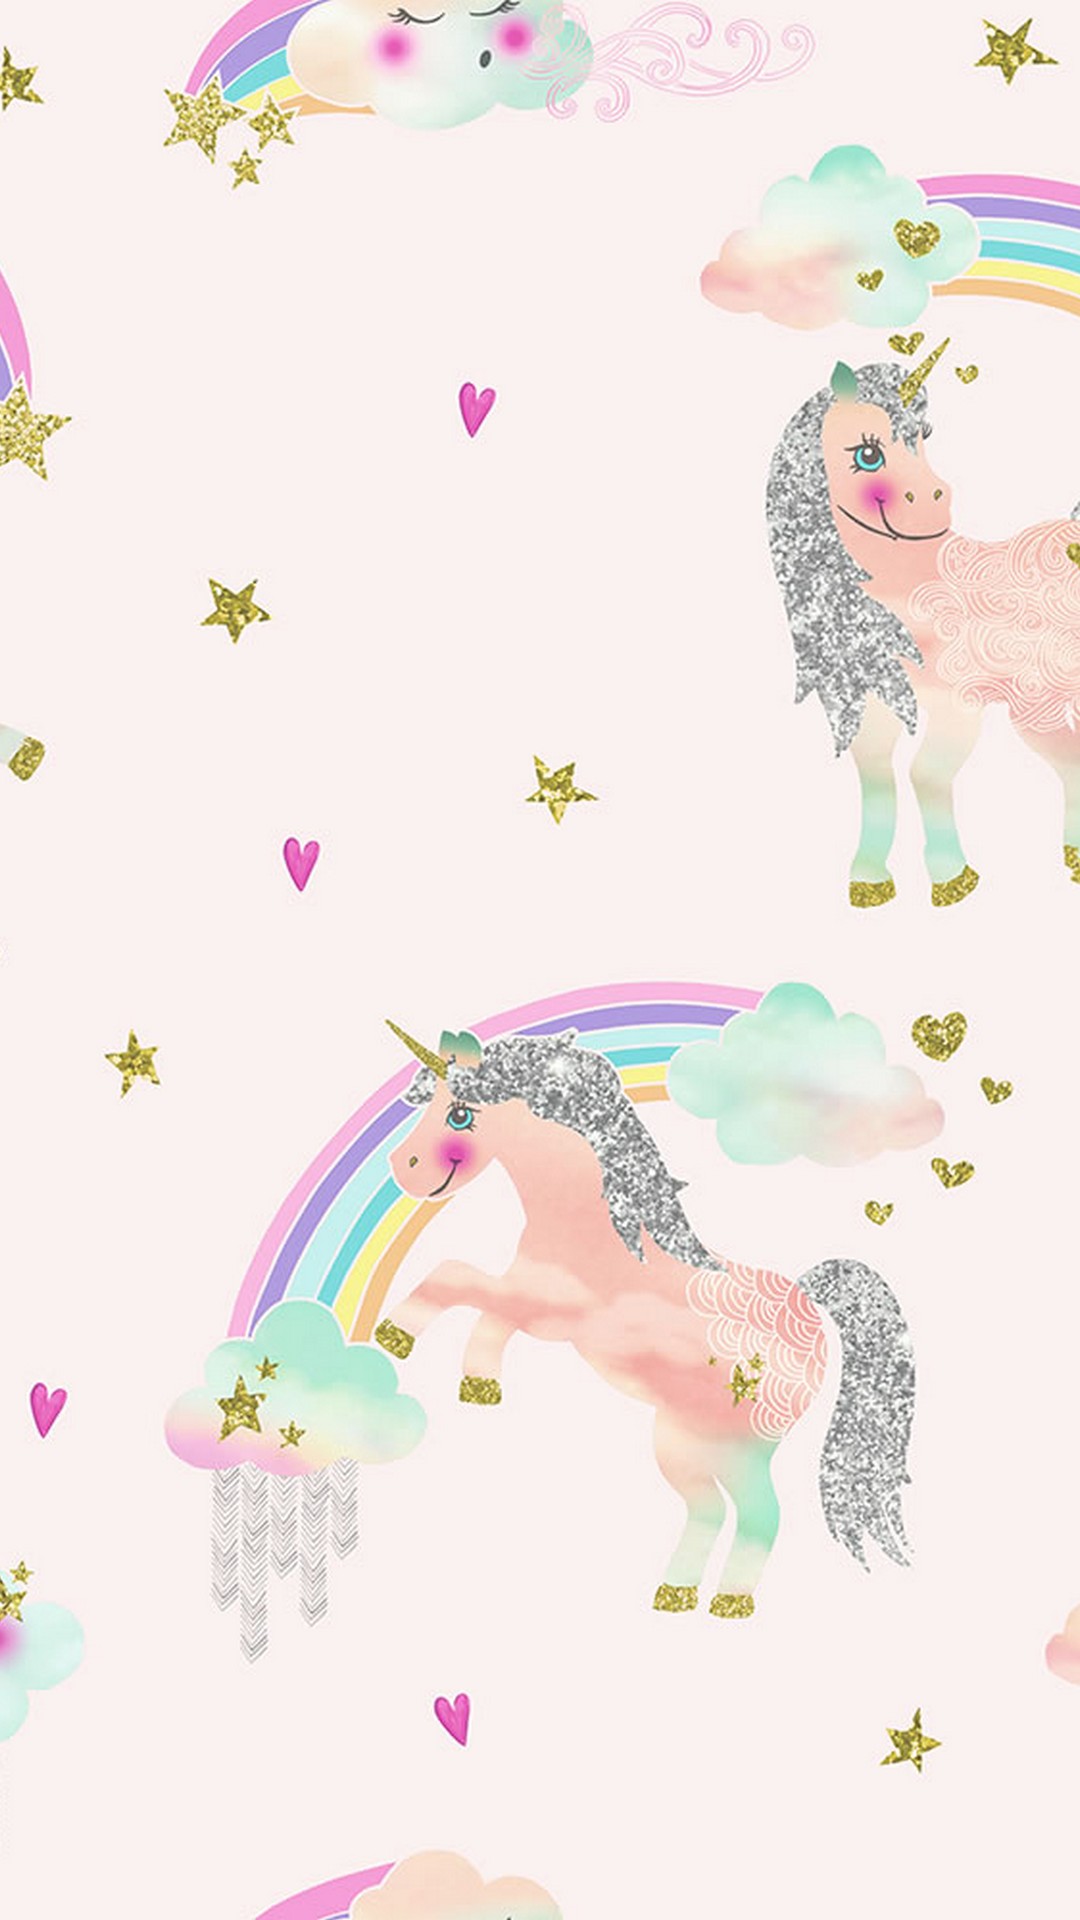 Cute Girly Unicorn iPhone Wallpaper With high-resolution 1080X1920 pixel. You can use this wallpaper for your iPhone 5, 6, 7, 8, X, XS, XR backgrounds, Mobile Screensaver, or iPad Lock Screen